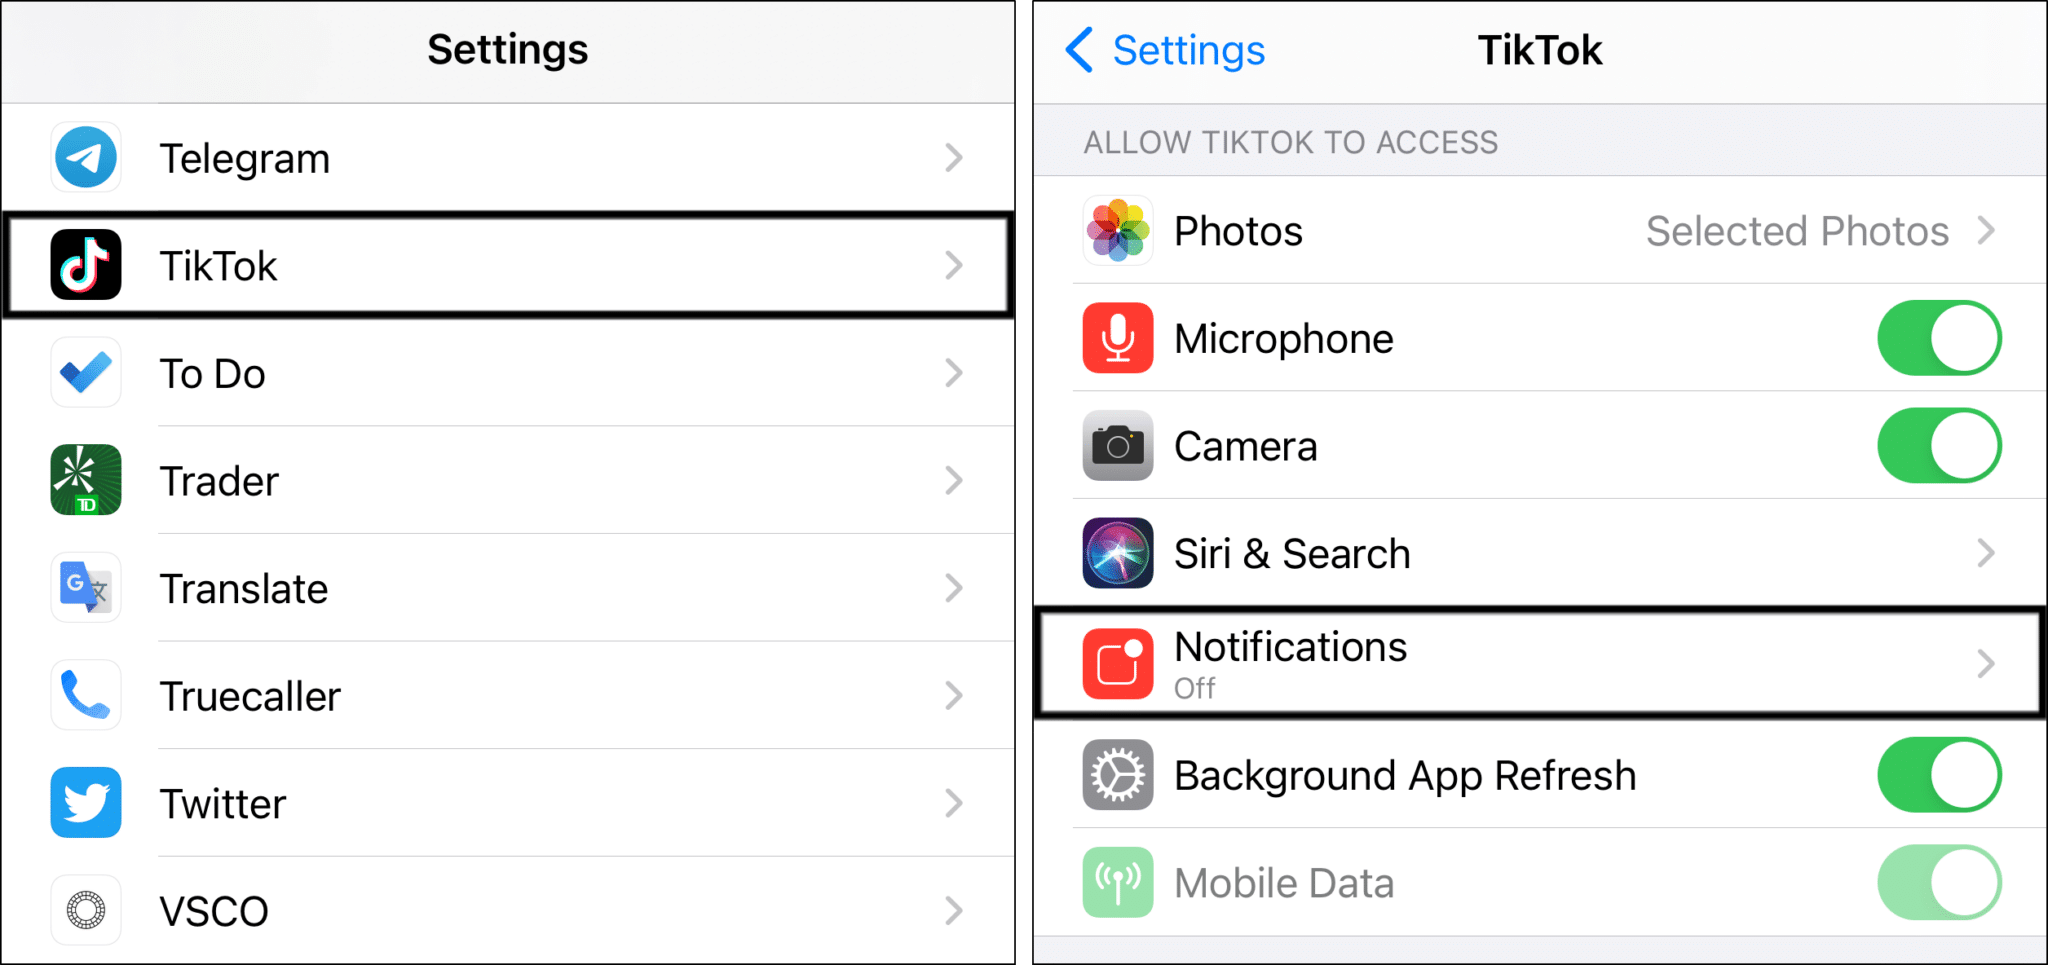 enable the notification settings in the system settings on iPhone and iPad to fix TikTok post and push notifications not working